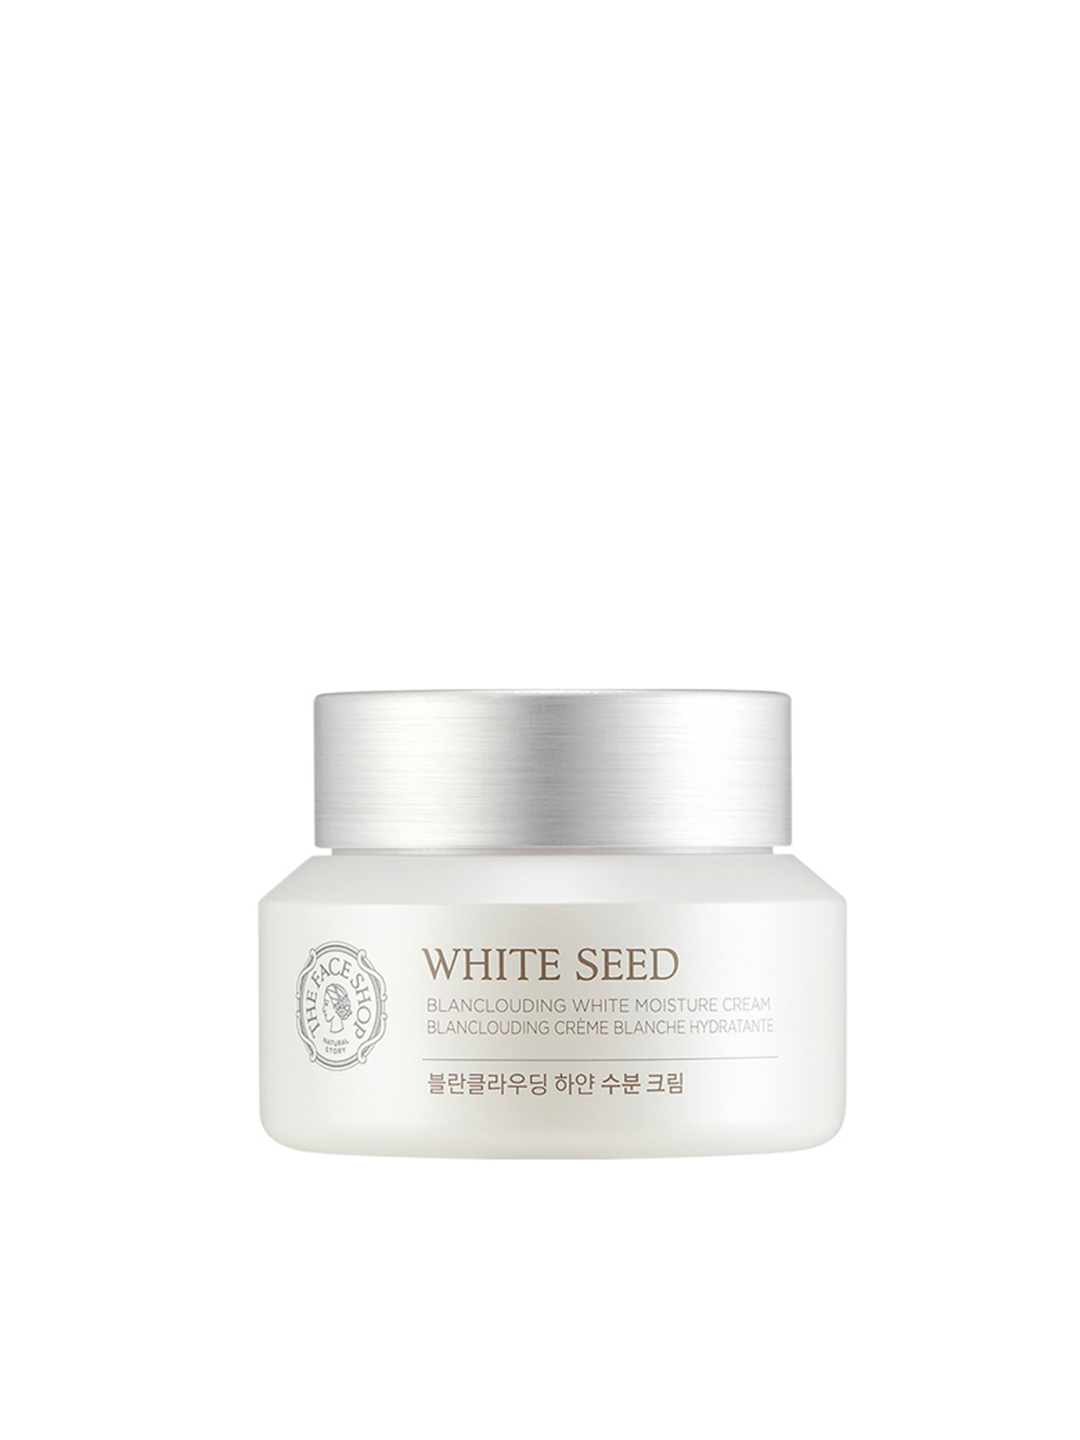 The Face Shop White Seed Blanclouding White Moisture Cream 50ml